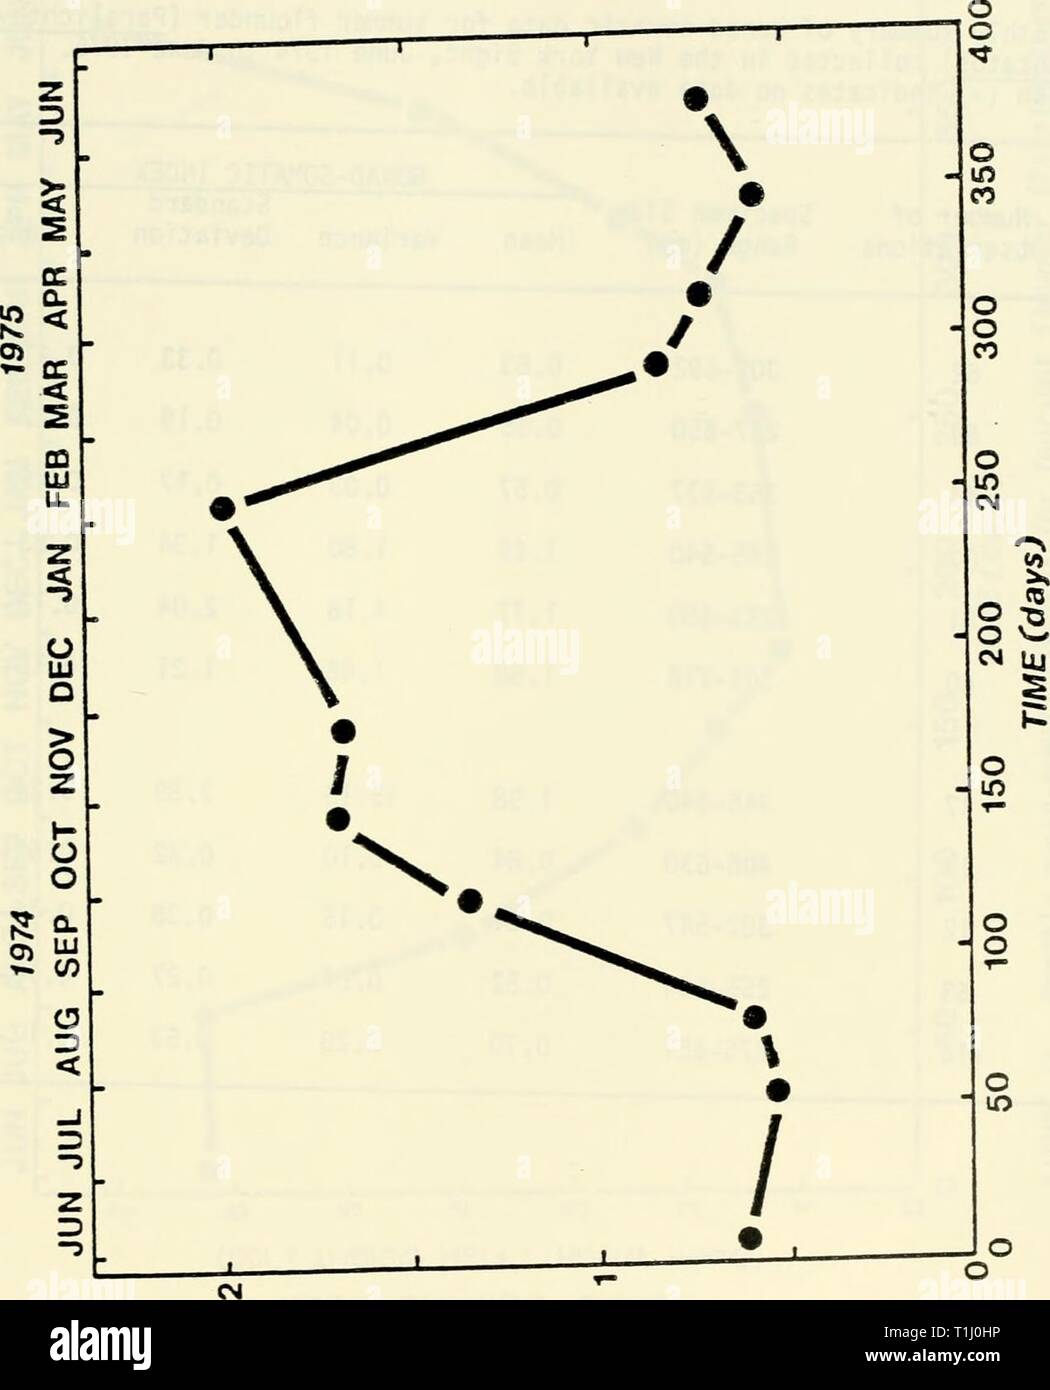 Distribution and abundance trends of Distribution and abundance trends of 22 selected species in the Middle Atlantic Bight from bottom trawl surveys during 1967-1979 : final report to the U.S. Mineral[s] Management Service  distributionabun1985unit Year: 1985  (001 * 1H9I3M HSId /1H9I3AA AfcJVAO) X3QNI OIlVl'JOS-OVNOO U If) en IB CL O â a ai c e O -3 +J w â SJ CD = co   S- 5- O O 9- 3 O) Z u -r-  e o â¢â¢- 3 T3 a o (/) 0J â a râ Â« o c  c CVâ- 1/1 &gt;&gt; 3  +J +J c c a ai S '3 531 Stock Photo